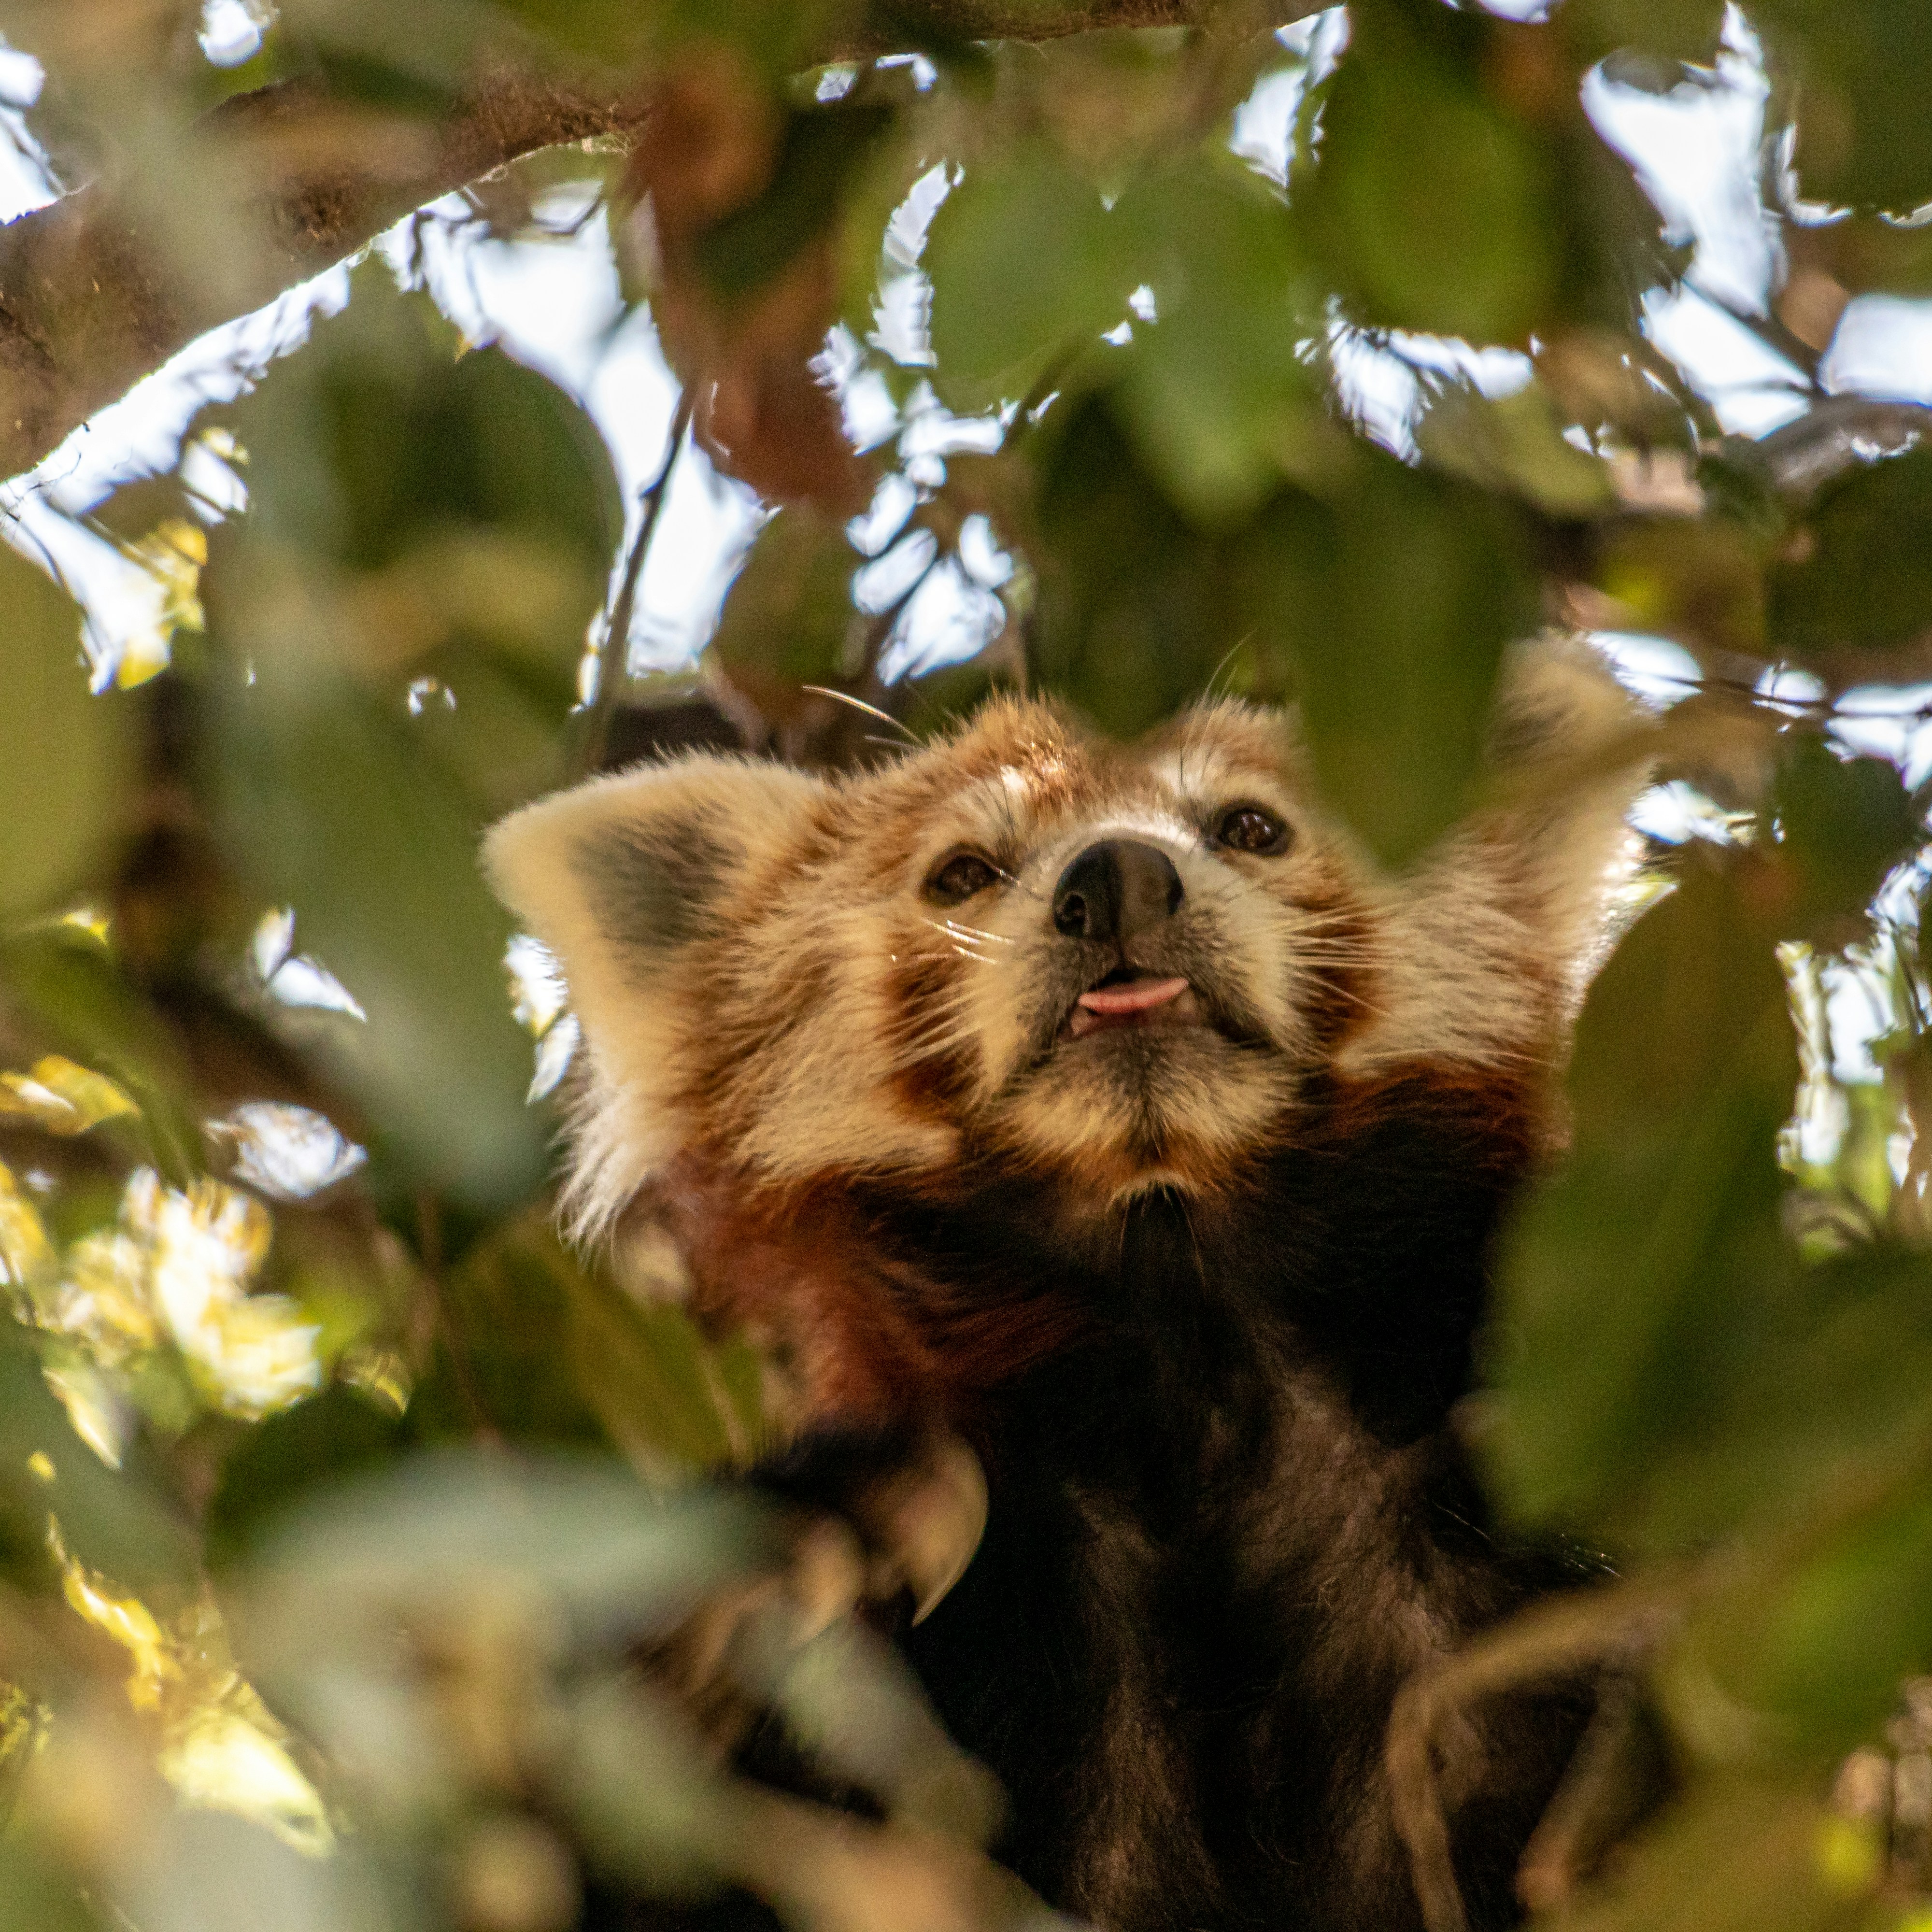 Red panda in a tree, sticking its tongue out